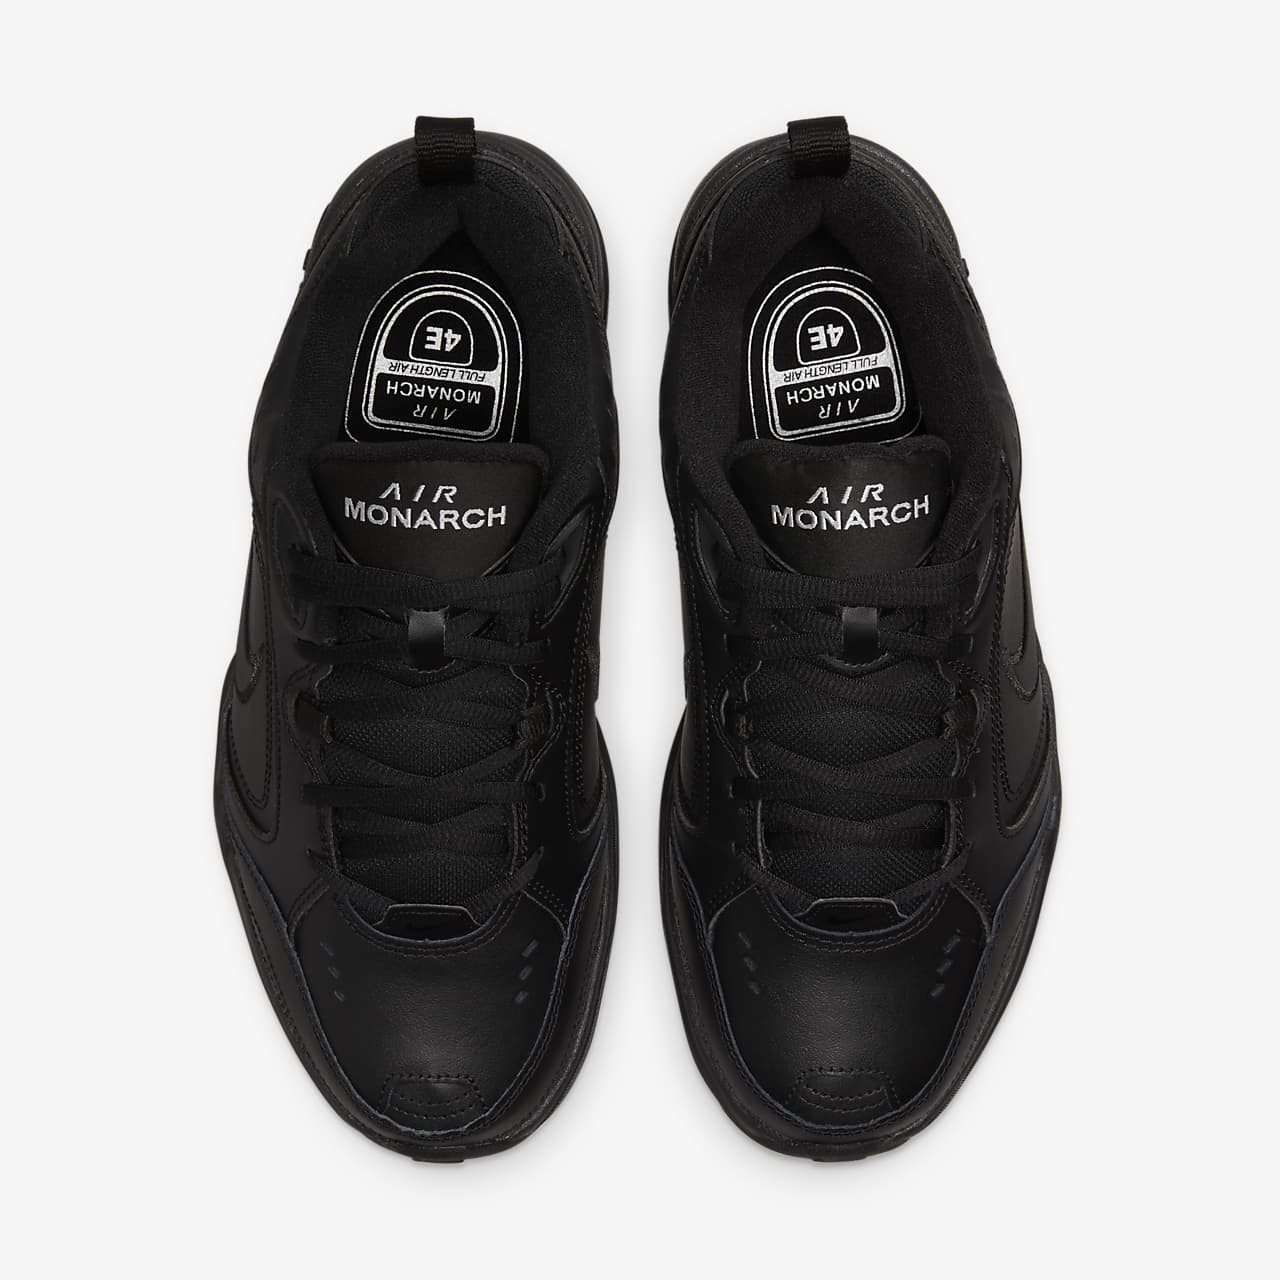 nike air monarch jcpenney